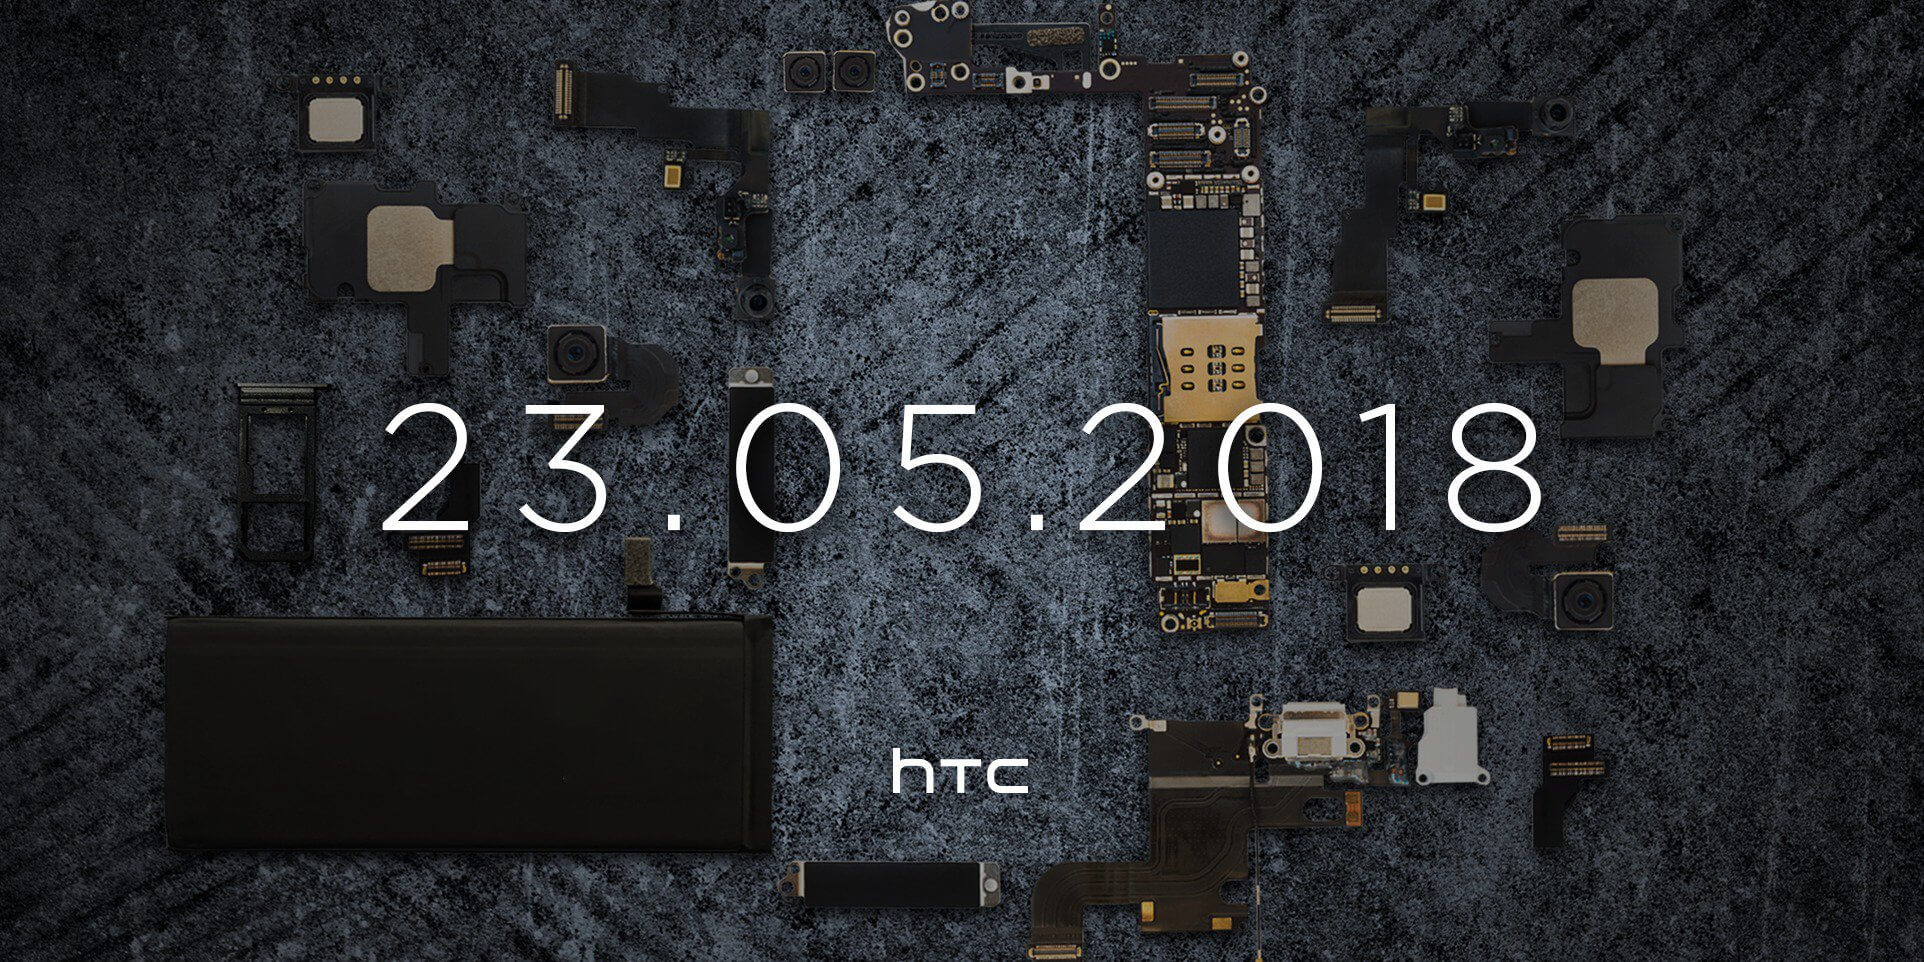 HTC's next flagship unveiling happens on May 23